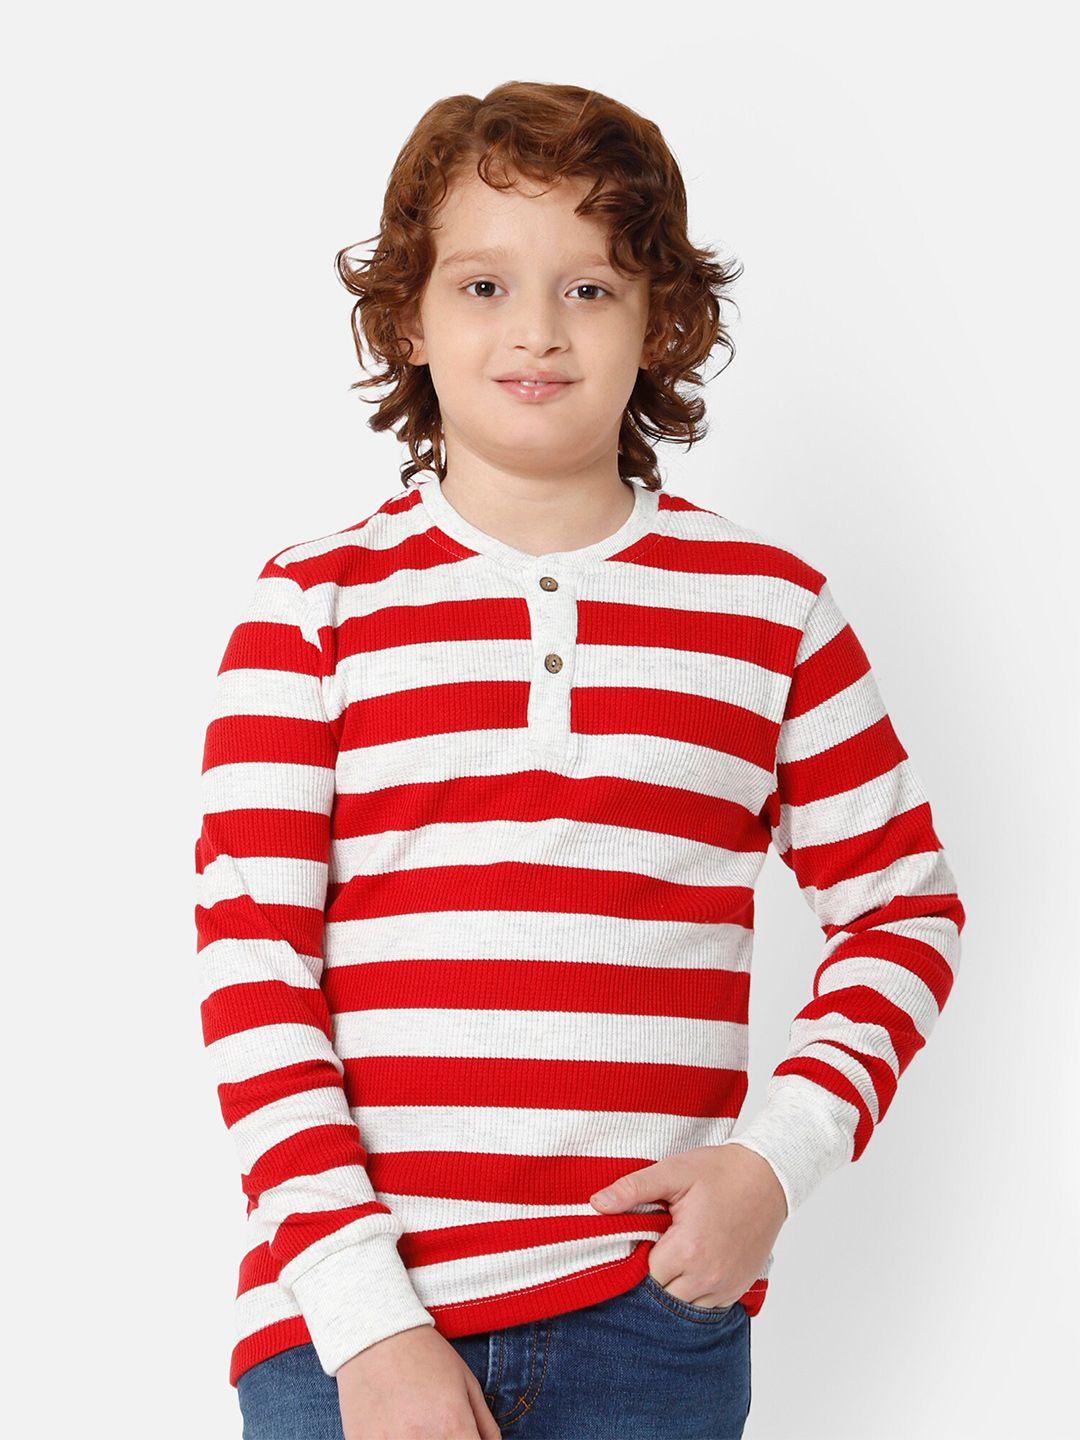 proteens boys red & white striped henley neck t-shirt